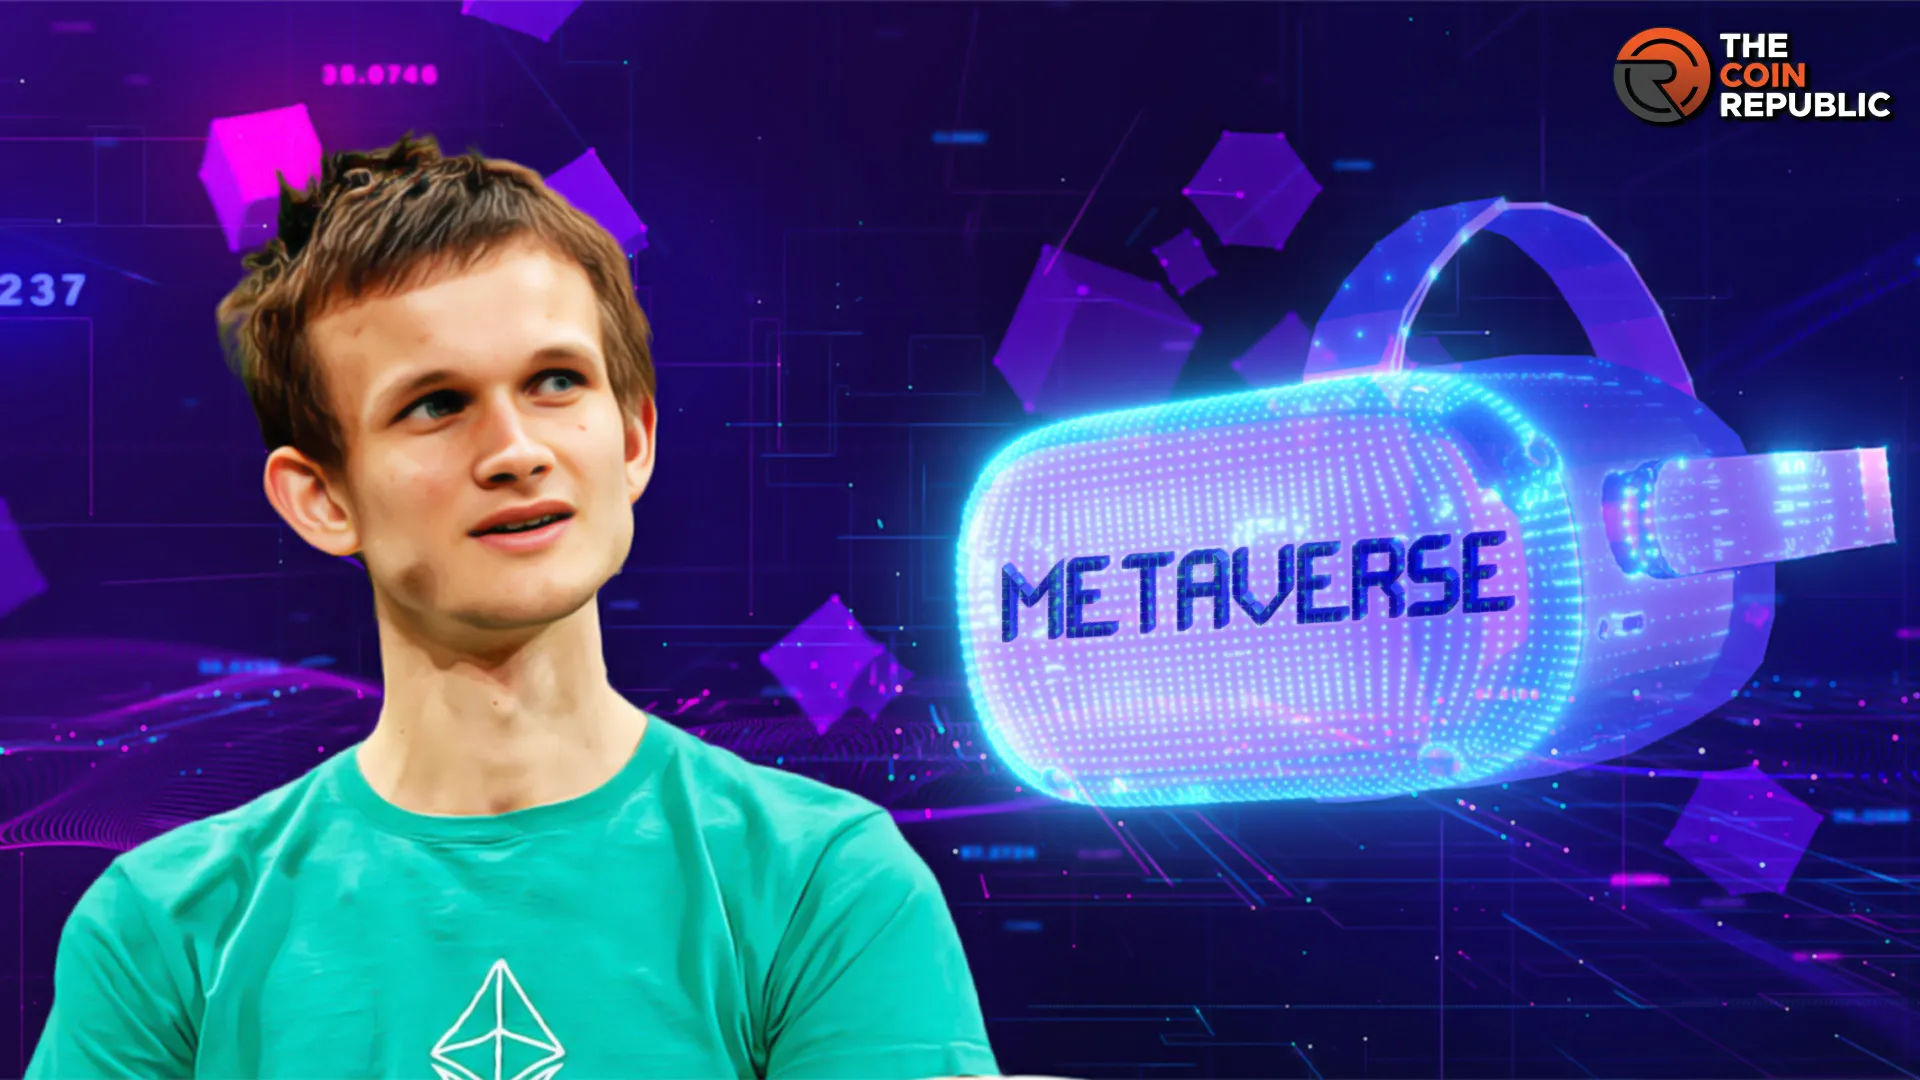 Metaverse Is Much More A Virtual Reality- Vitalik Buterin